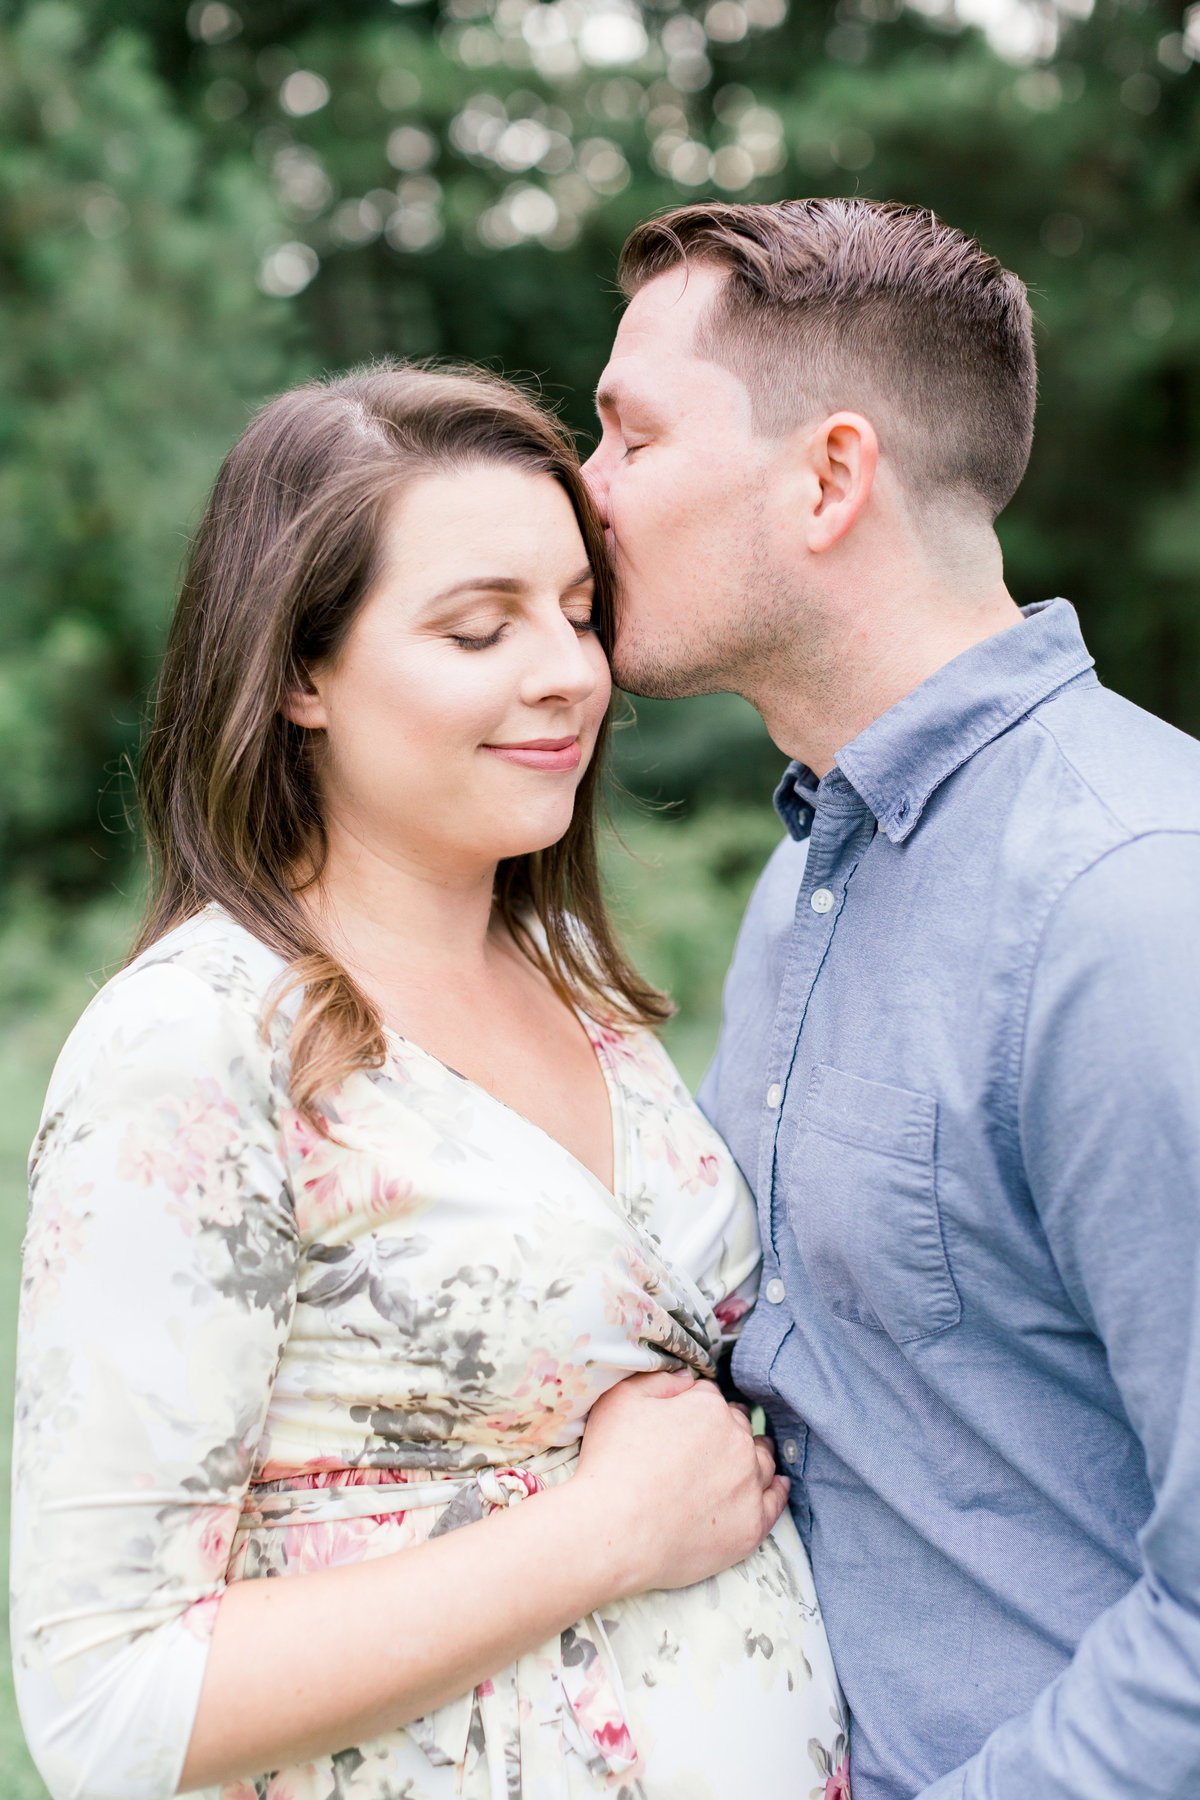 Dave and Emily-Maternity Session-Samantha Laffoon Photography-6